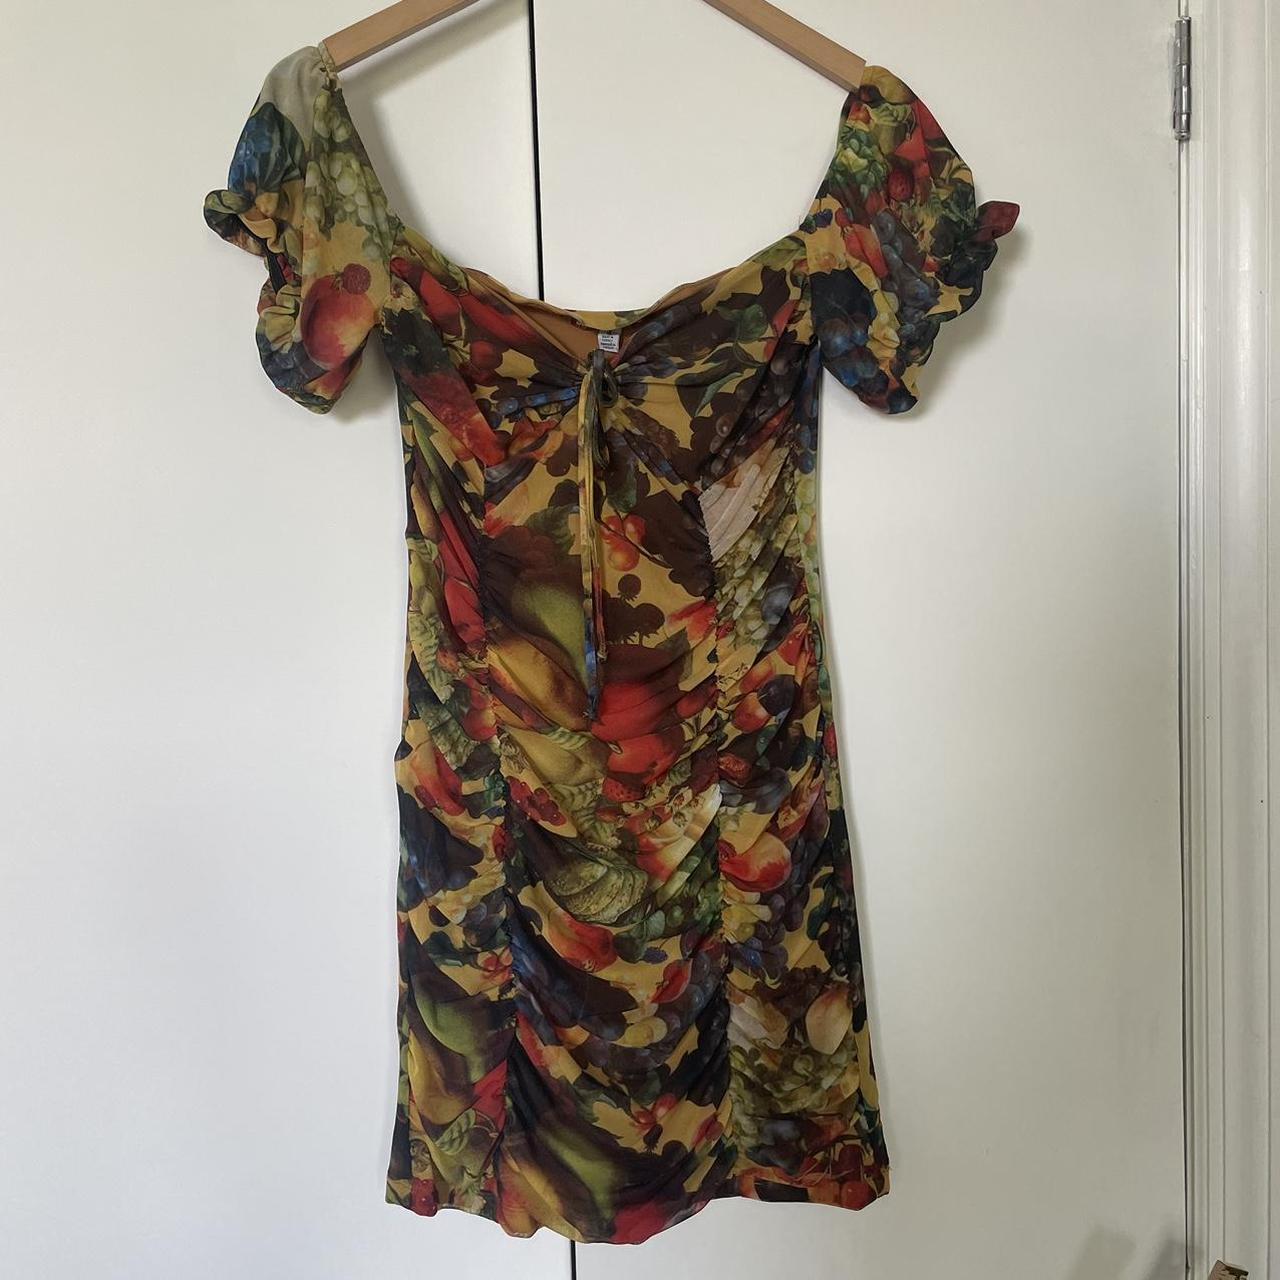 NWOT Urban Outfitters mesh fruit dress. Can be worn... - Depop